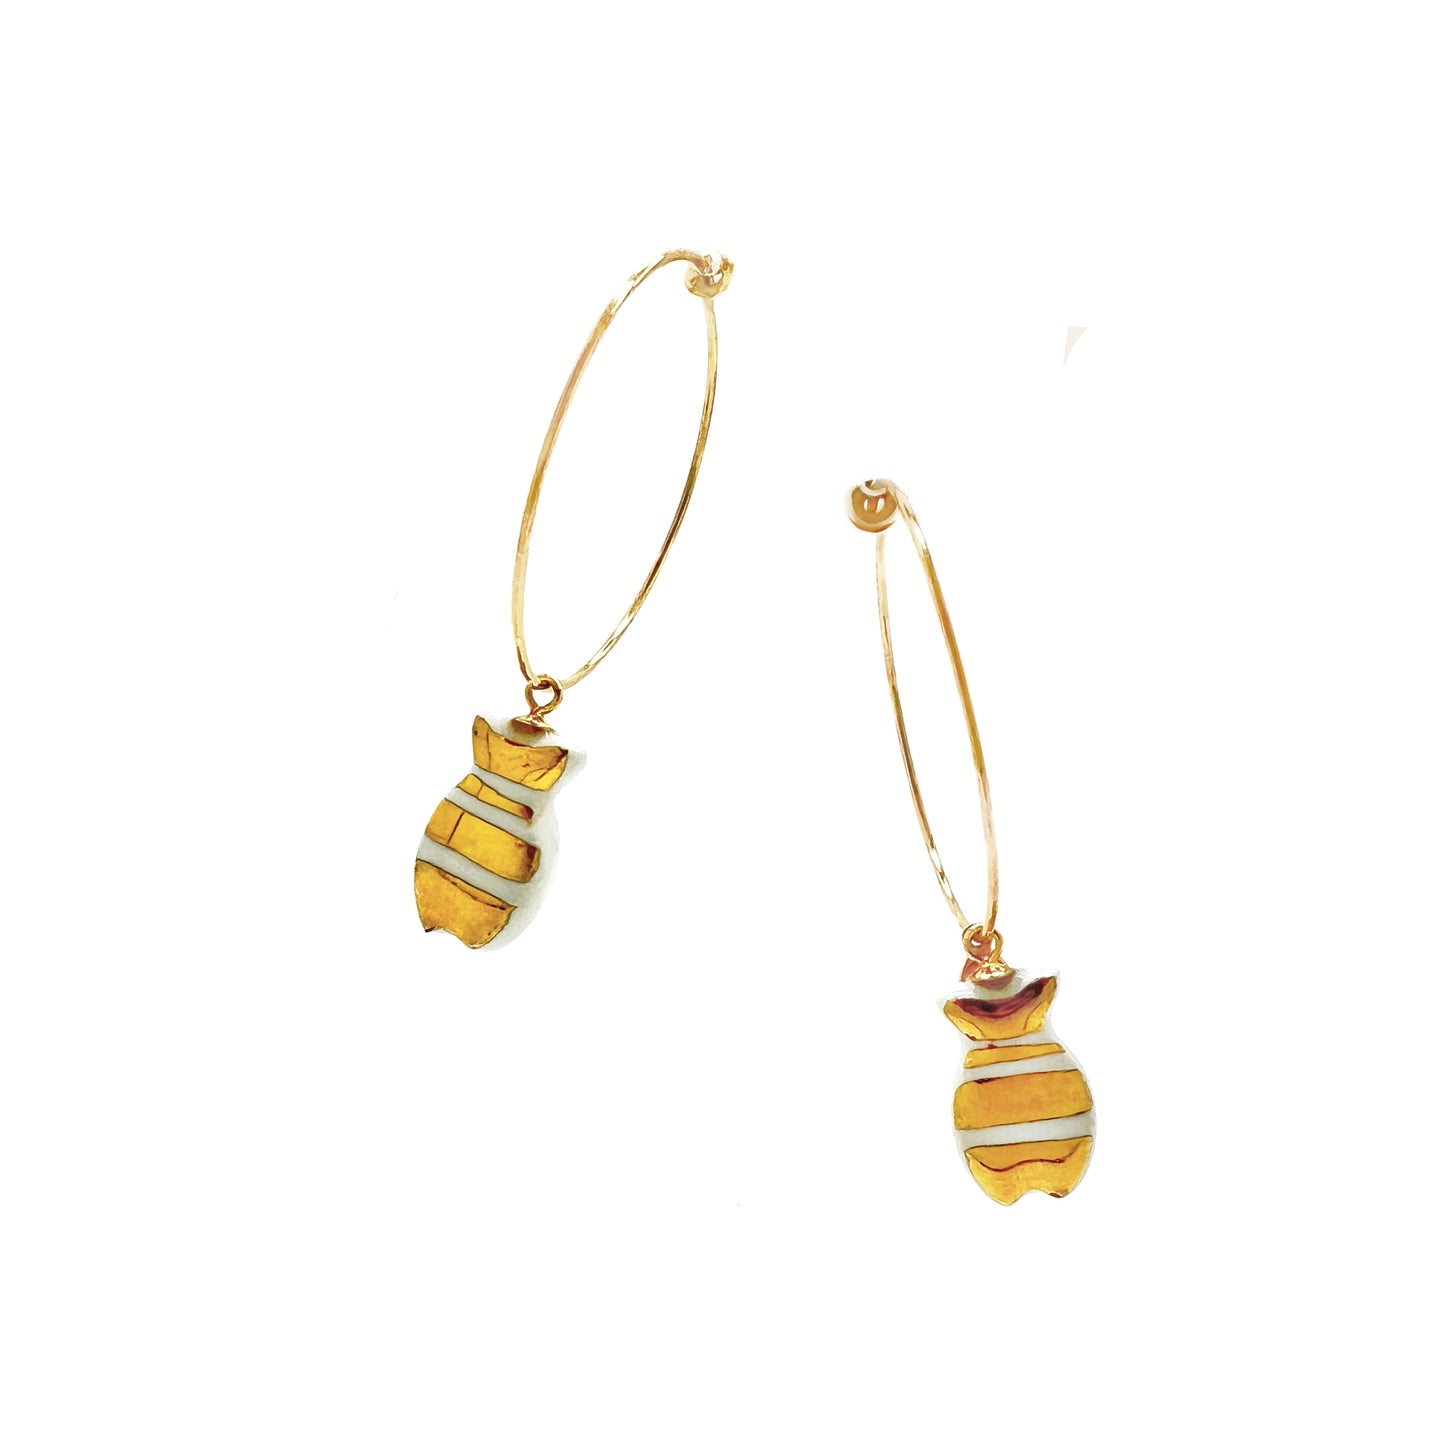 Little fish hoop earrings with gold lines